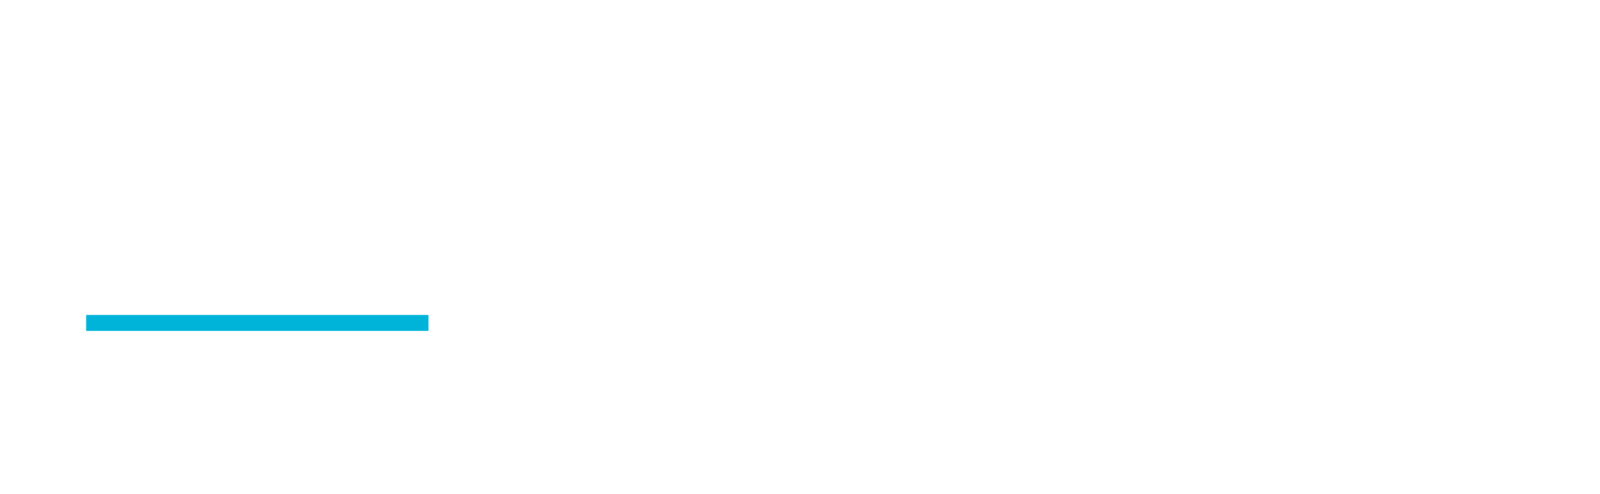 White Ulmer logo design with blue line under the letter "U" and the company tagline reading, "Our business begins with you"